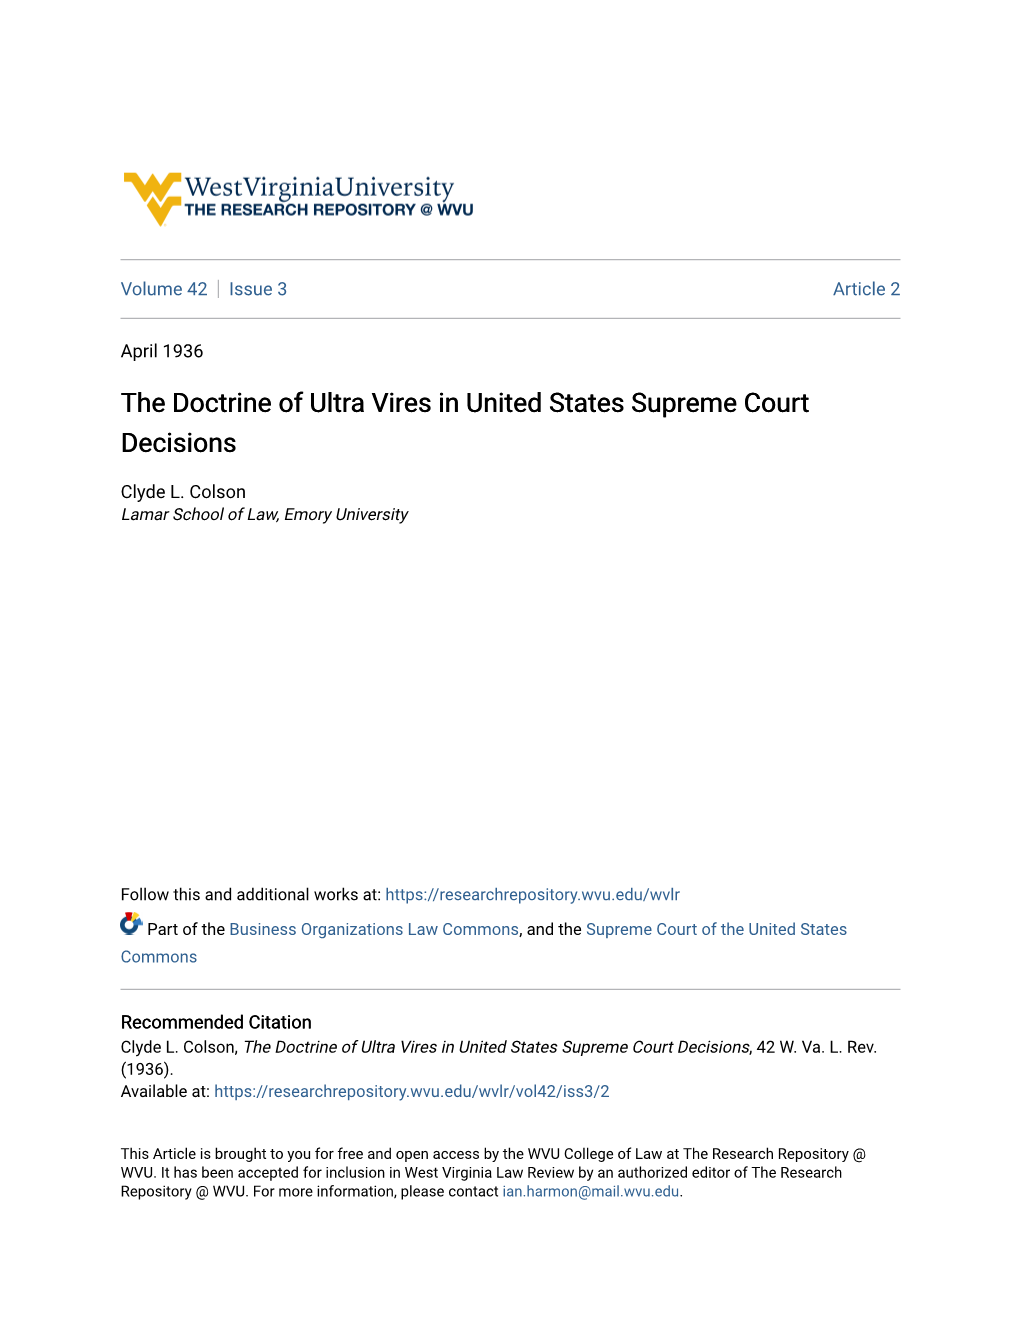 The Doctrine of Ultra Vires in United States Supreme Court Decisions